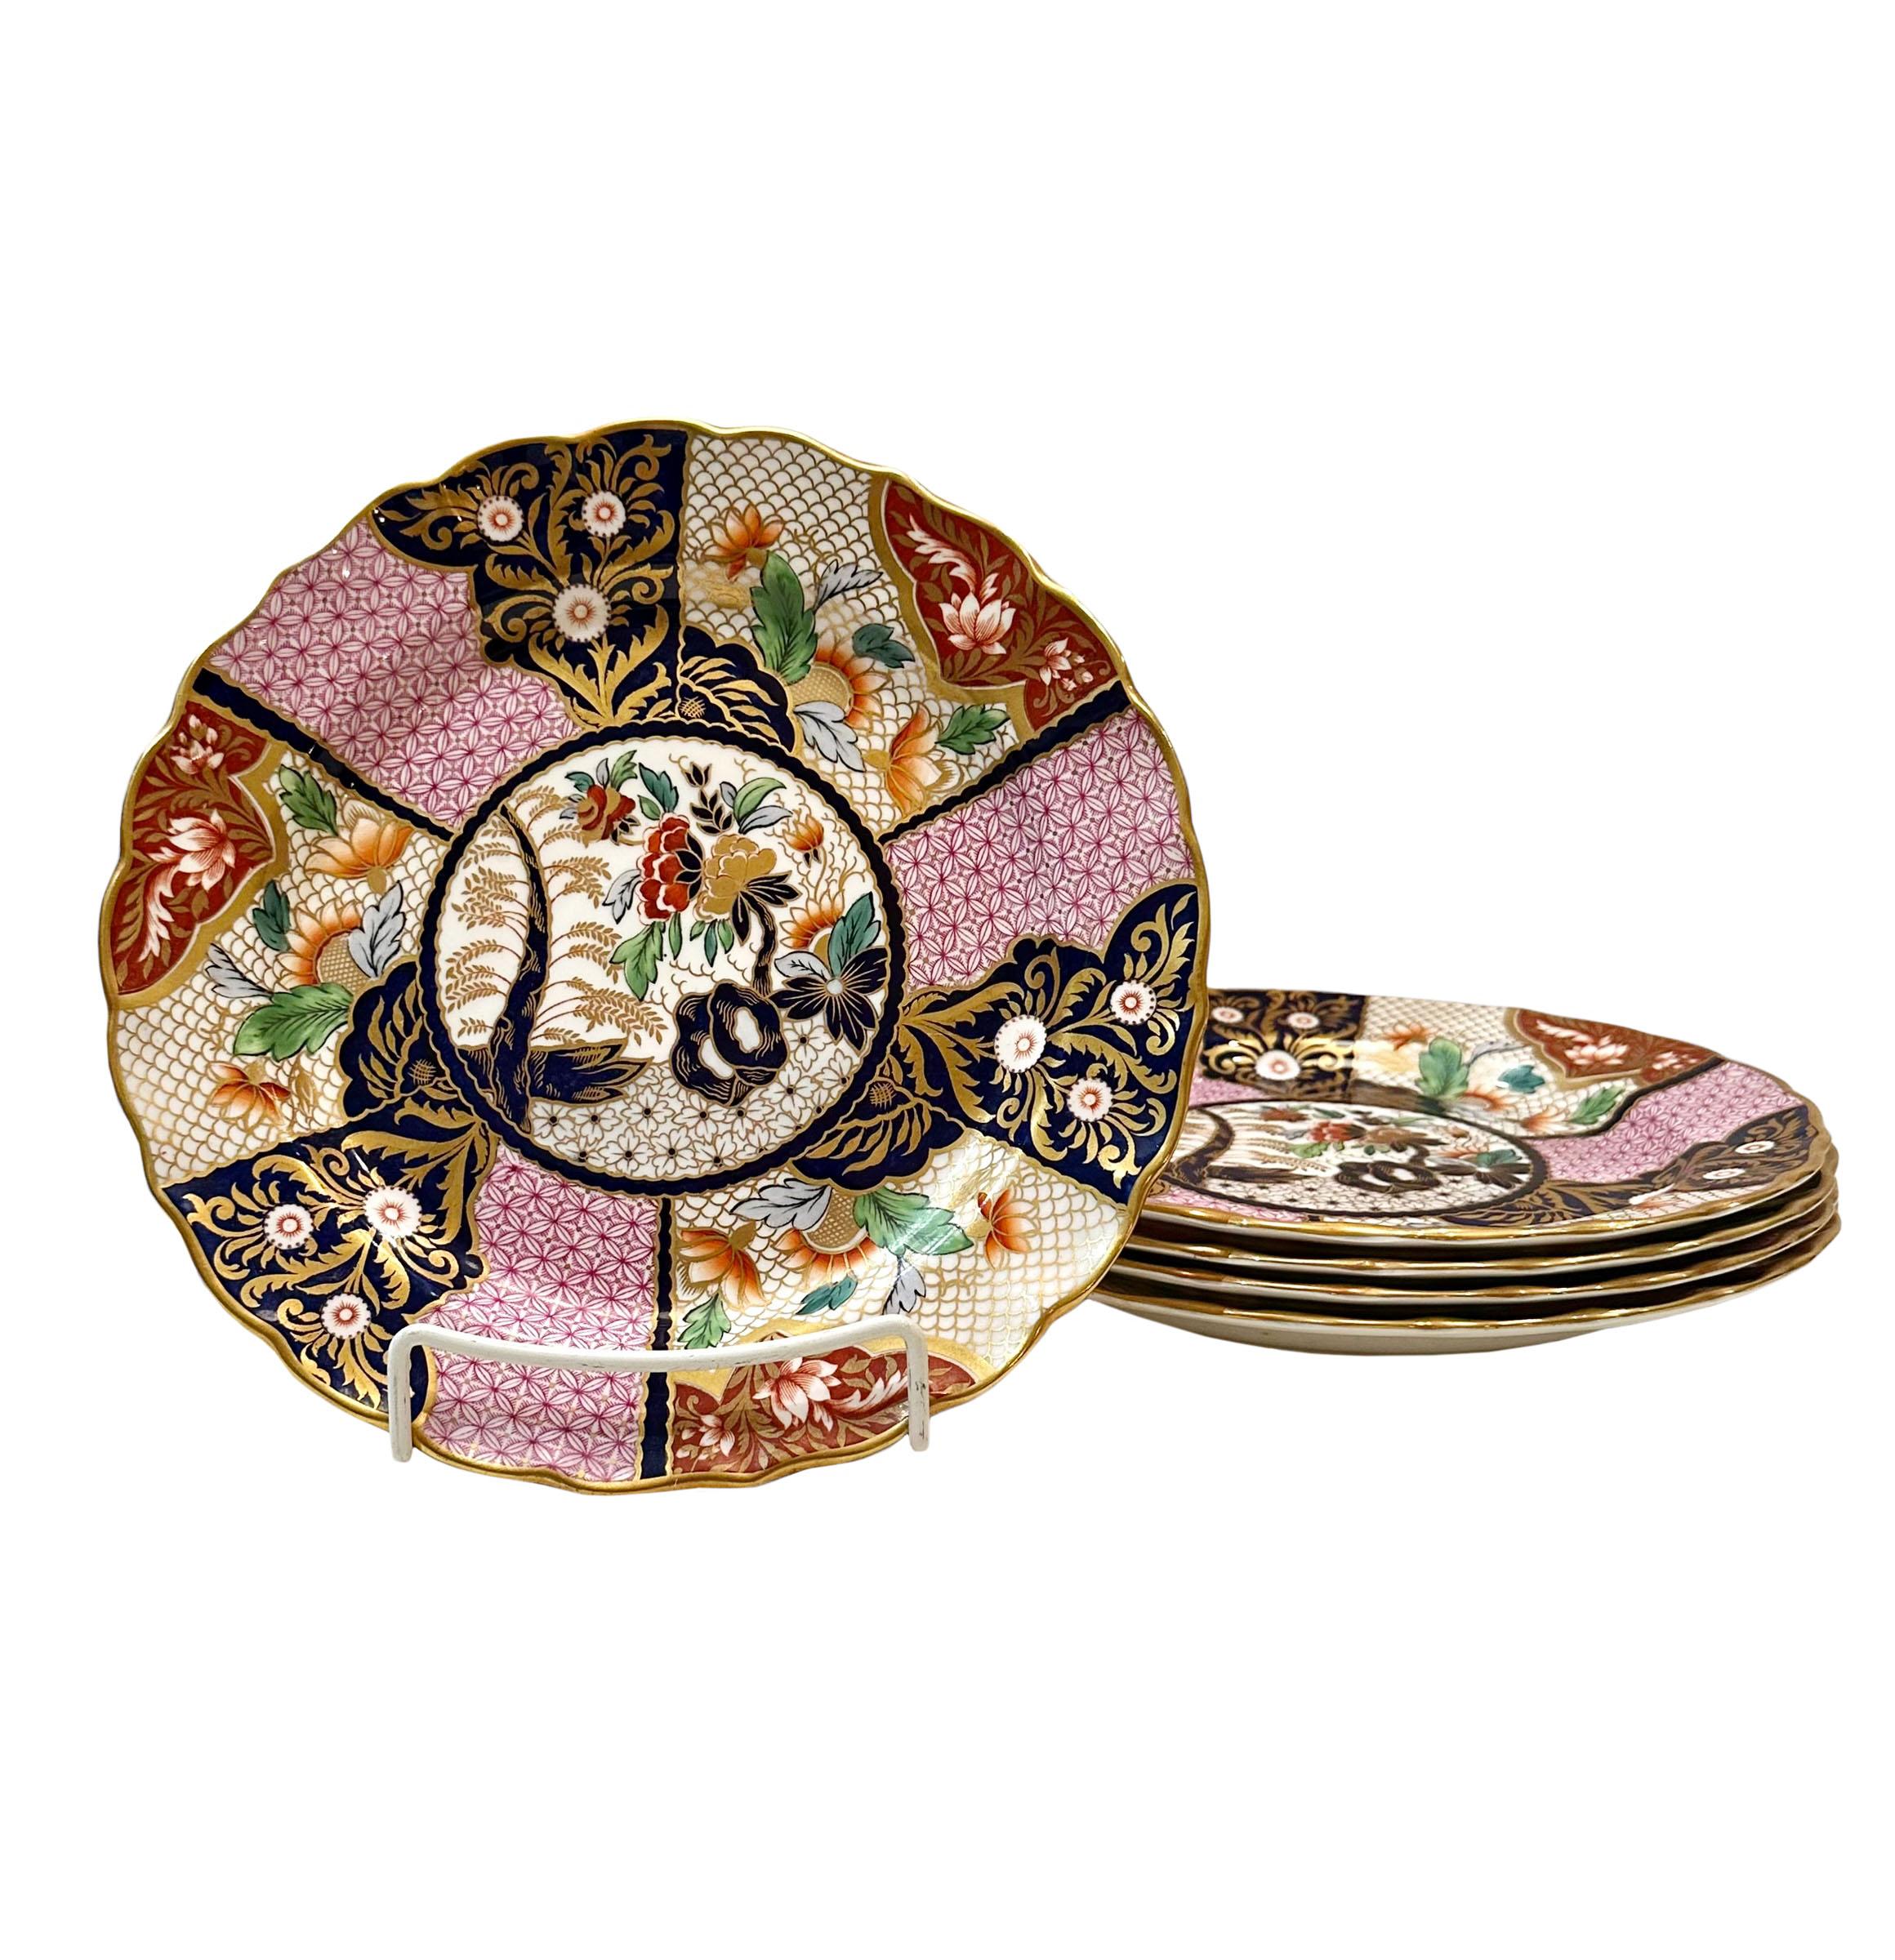 A set of four Imperial Stone china plates by John Ridgeway. Highly decorated in pink, gold and black with paneled with florals. English, 1835.